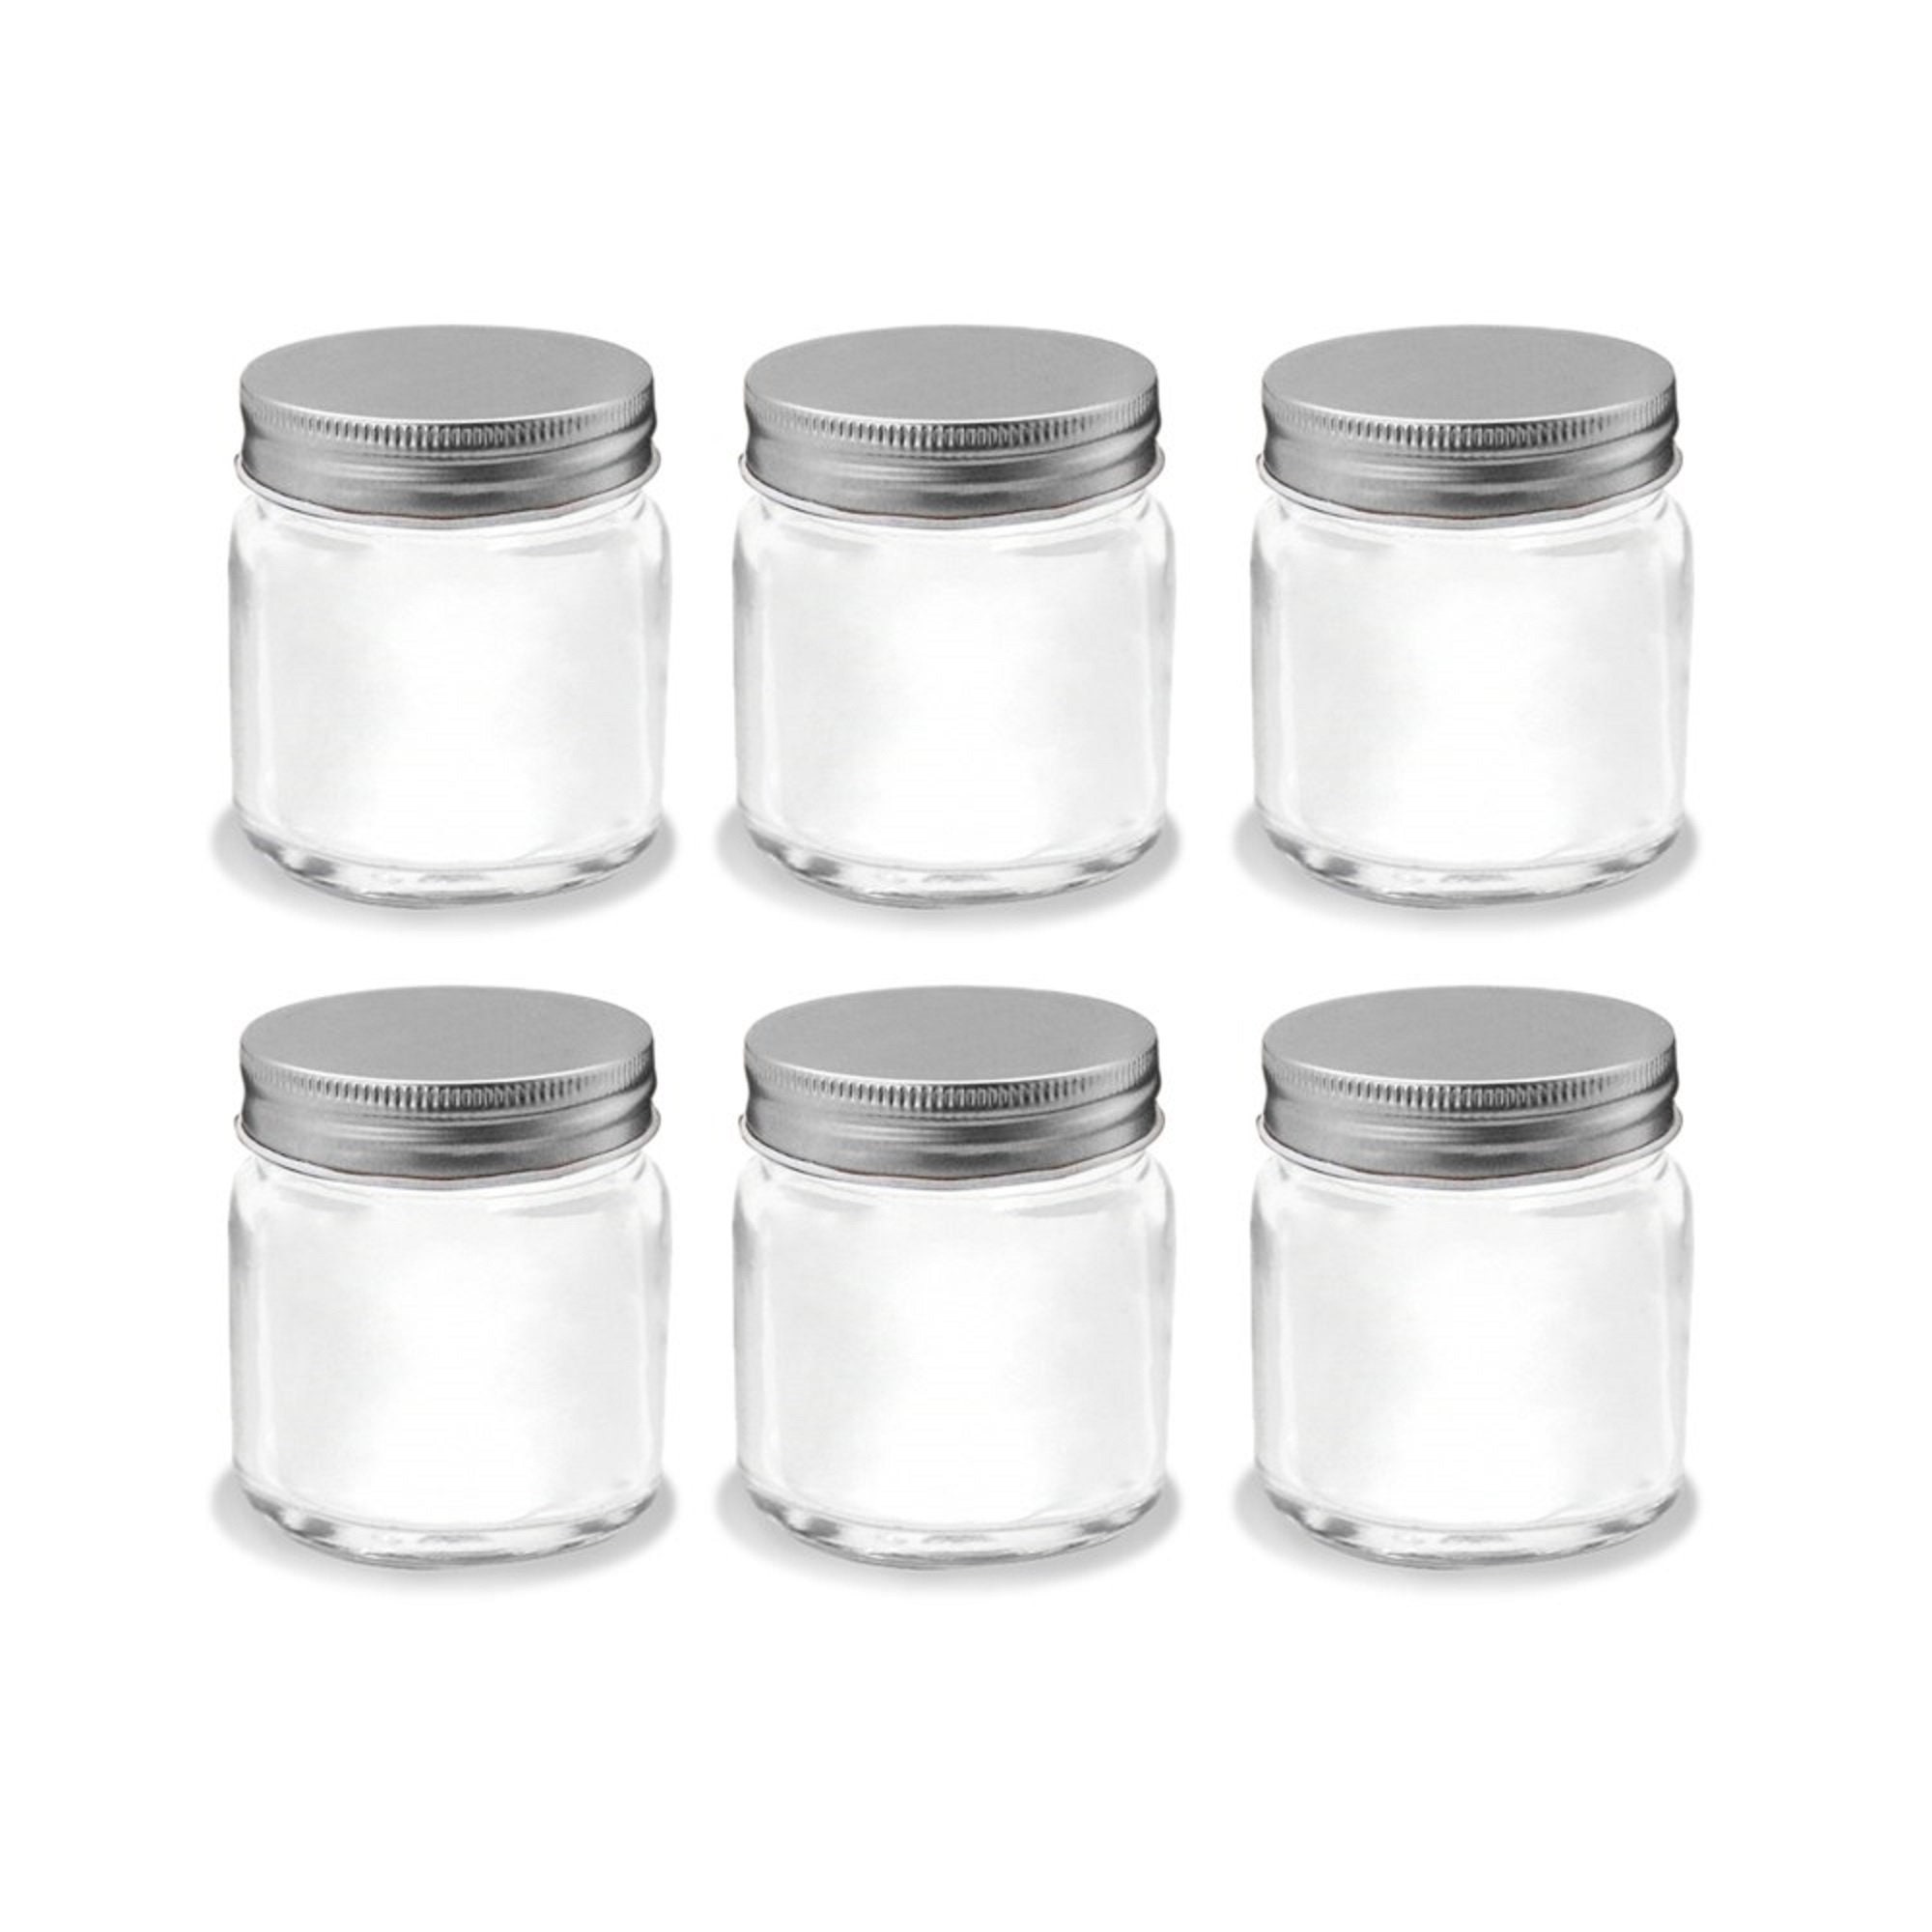 6 Pack Mini Glass Jars with Silver Lids, Honey Jars Small Spice Jars Mason Jars for Spices, Gifts, Wedding Party Favors, DIY and More, Size: 3.54 x